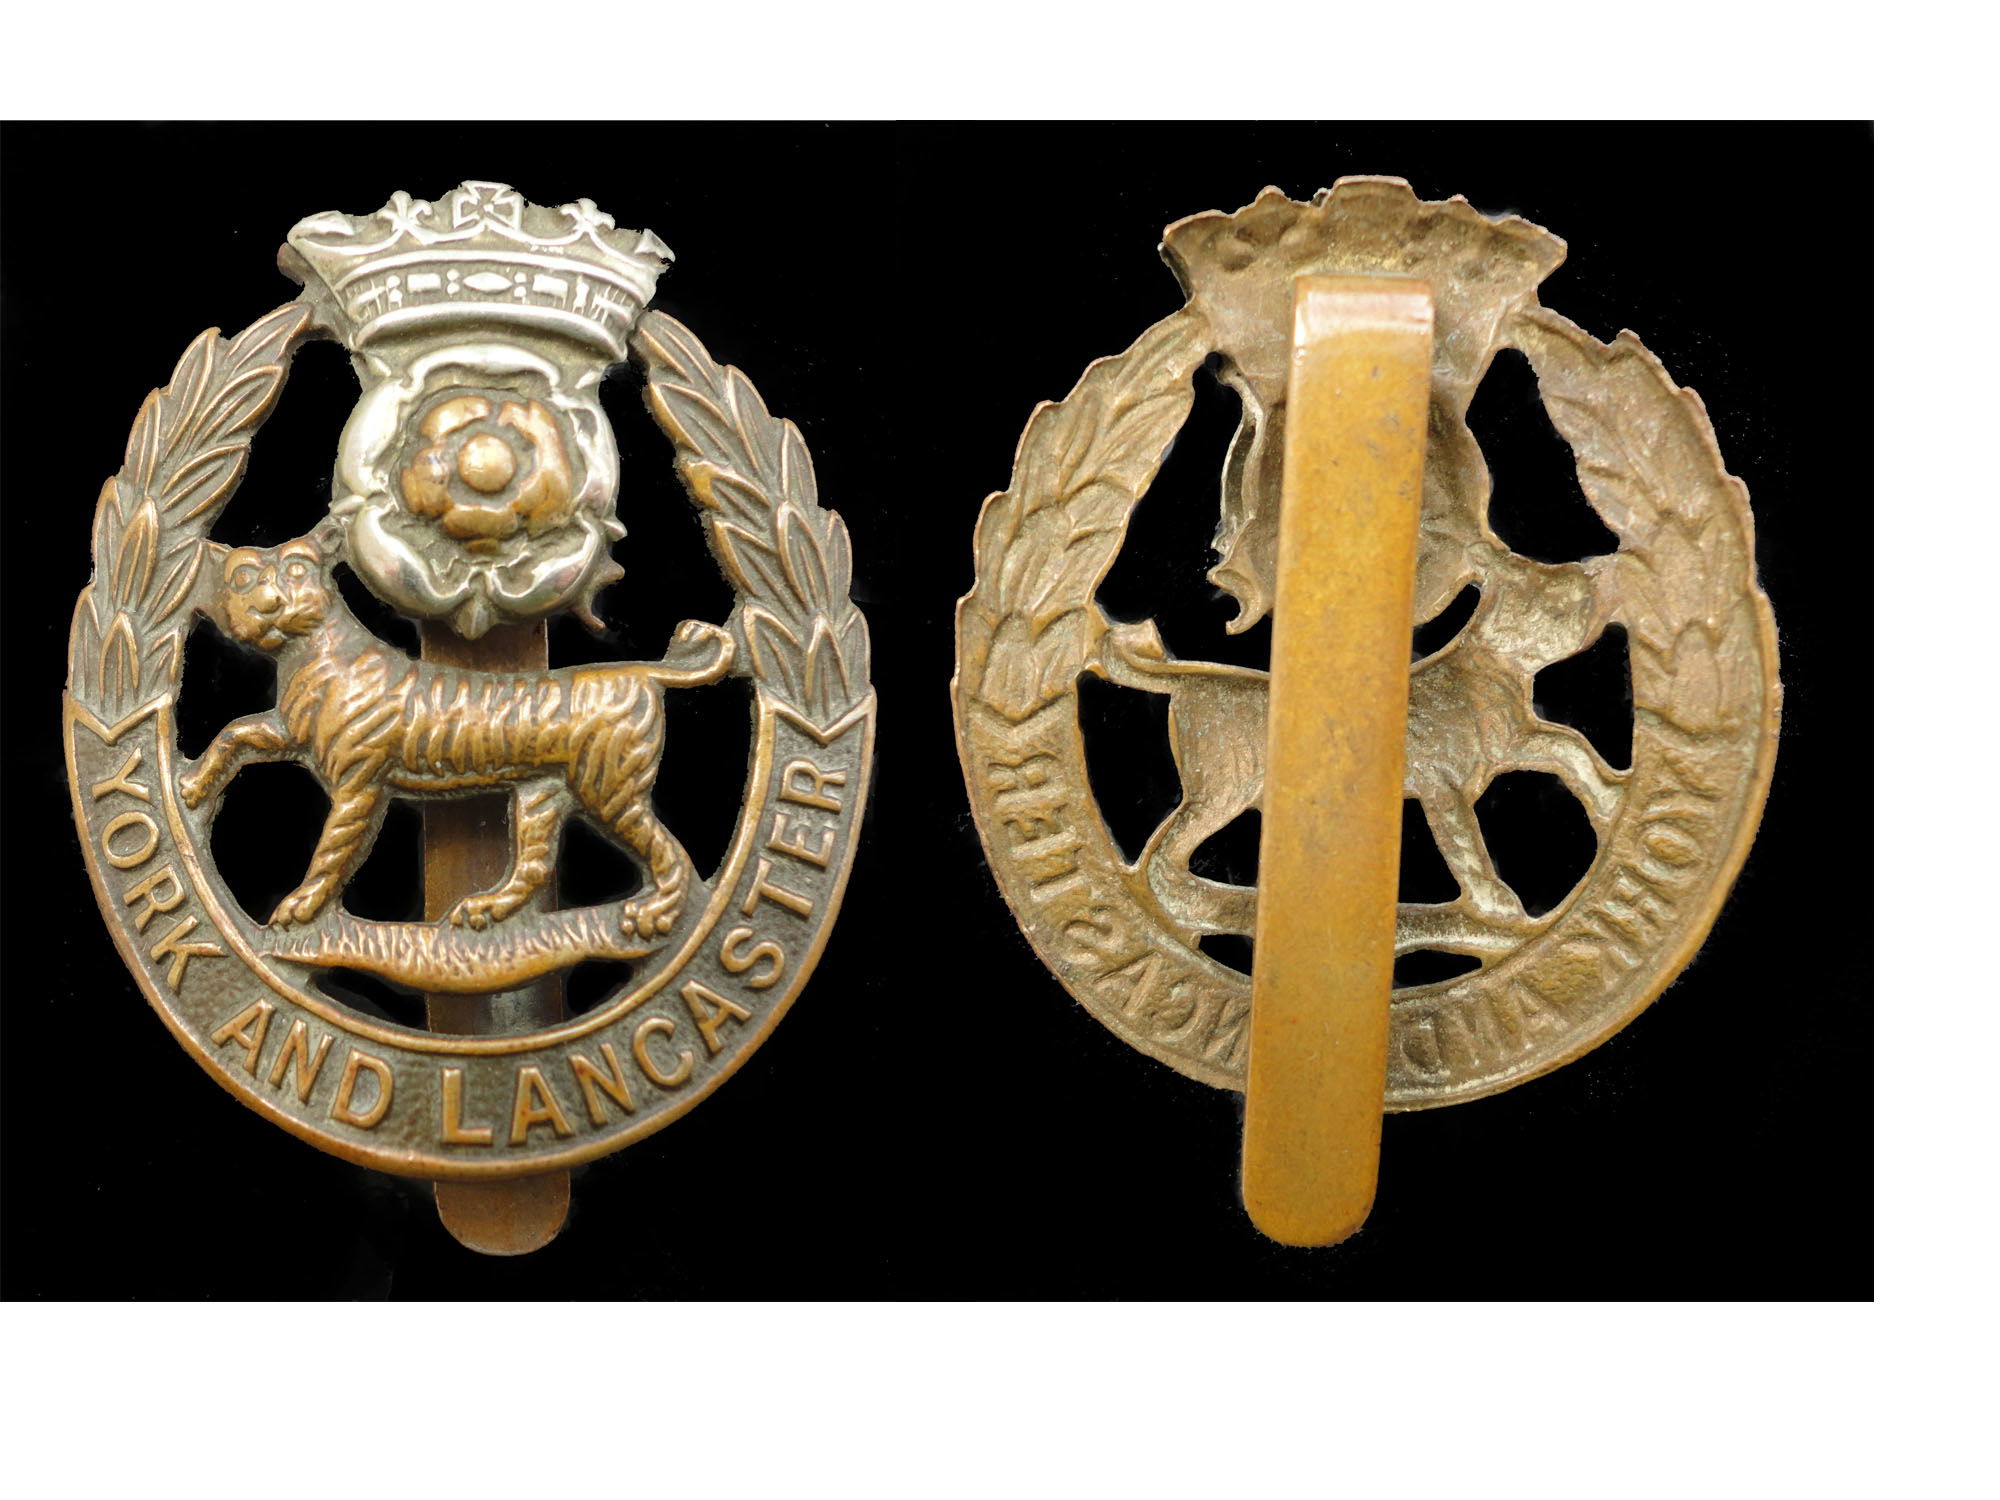 Other Ranks Badge